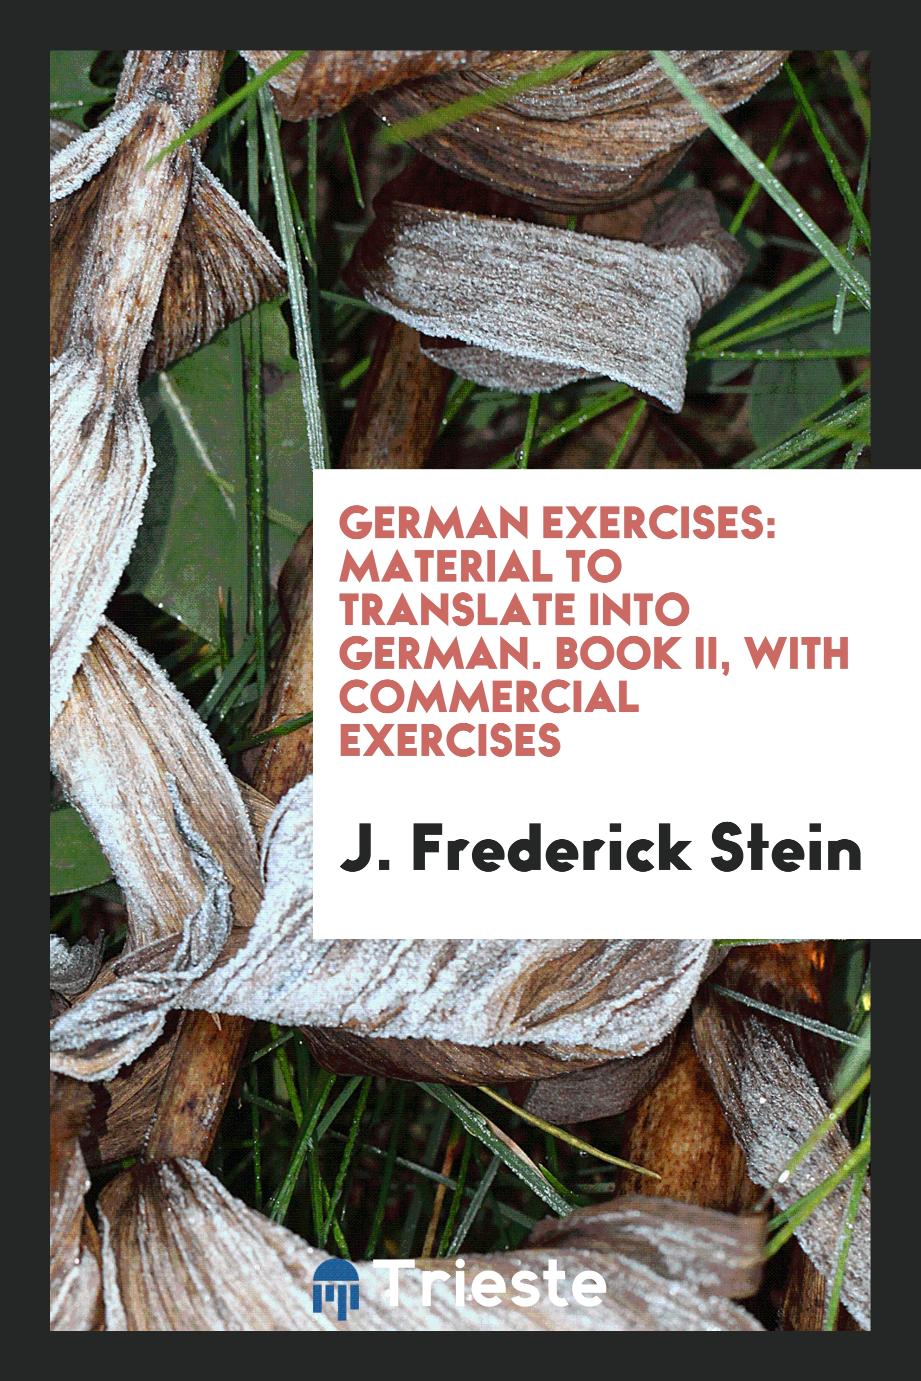 German Exercises: Material to Translate into German. Book II, with Commercial Exercises